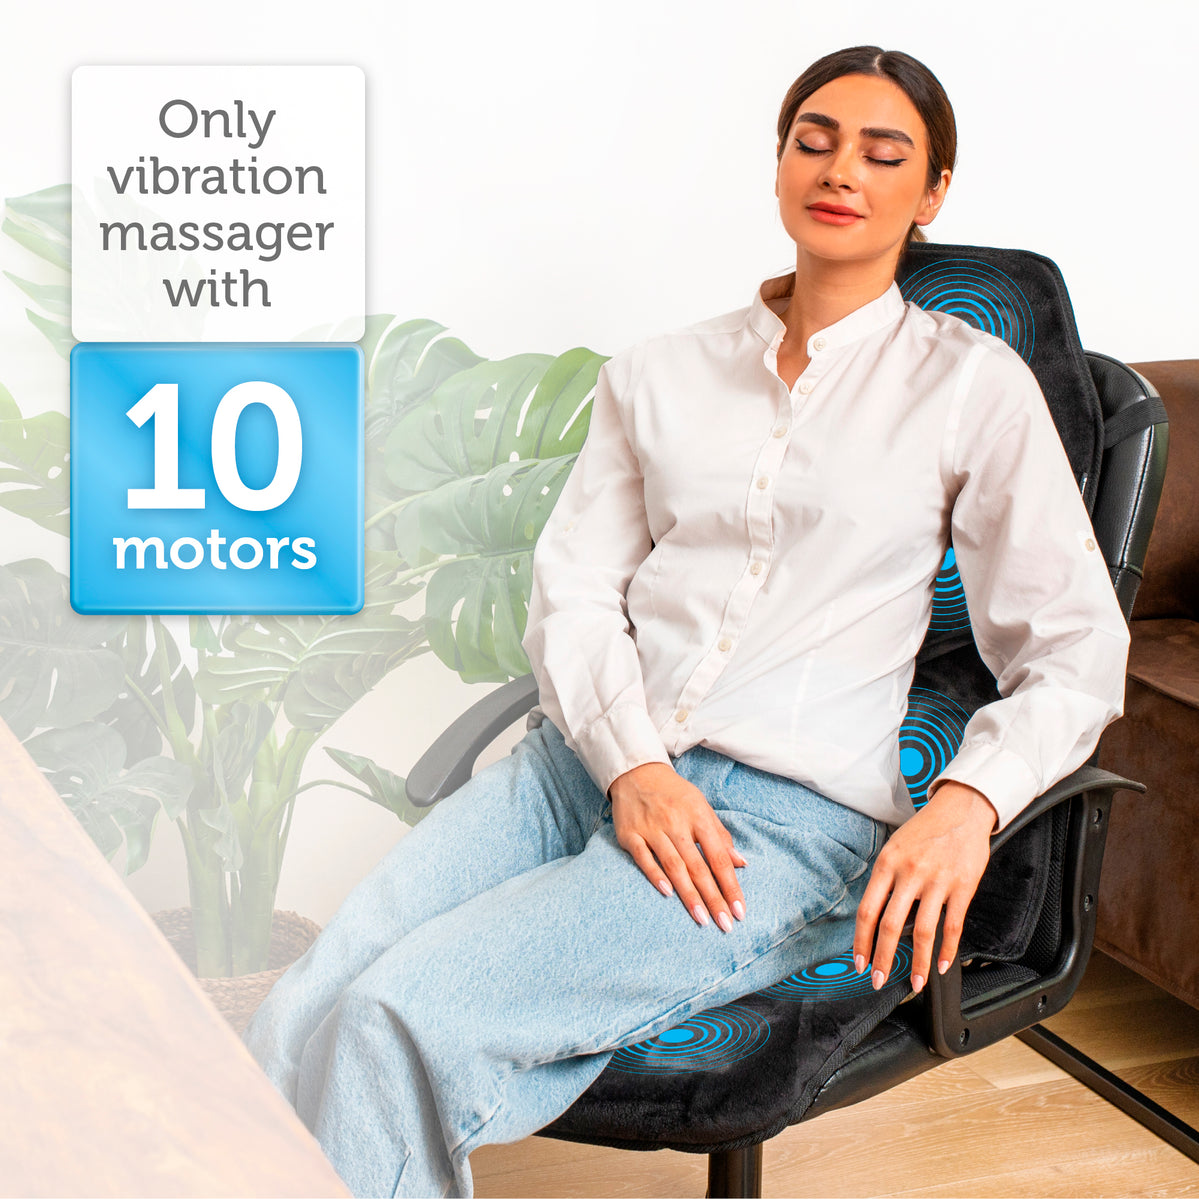 Comfier Massage Seat Cushion with Heat - 10 Vibration Motors Seat Warmer, Back Massager for Chair, Massage Chair Pad for Back Ideal Gifts for Women